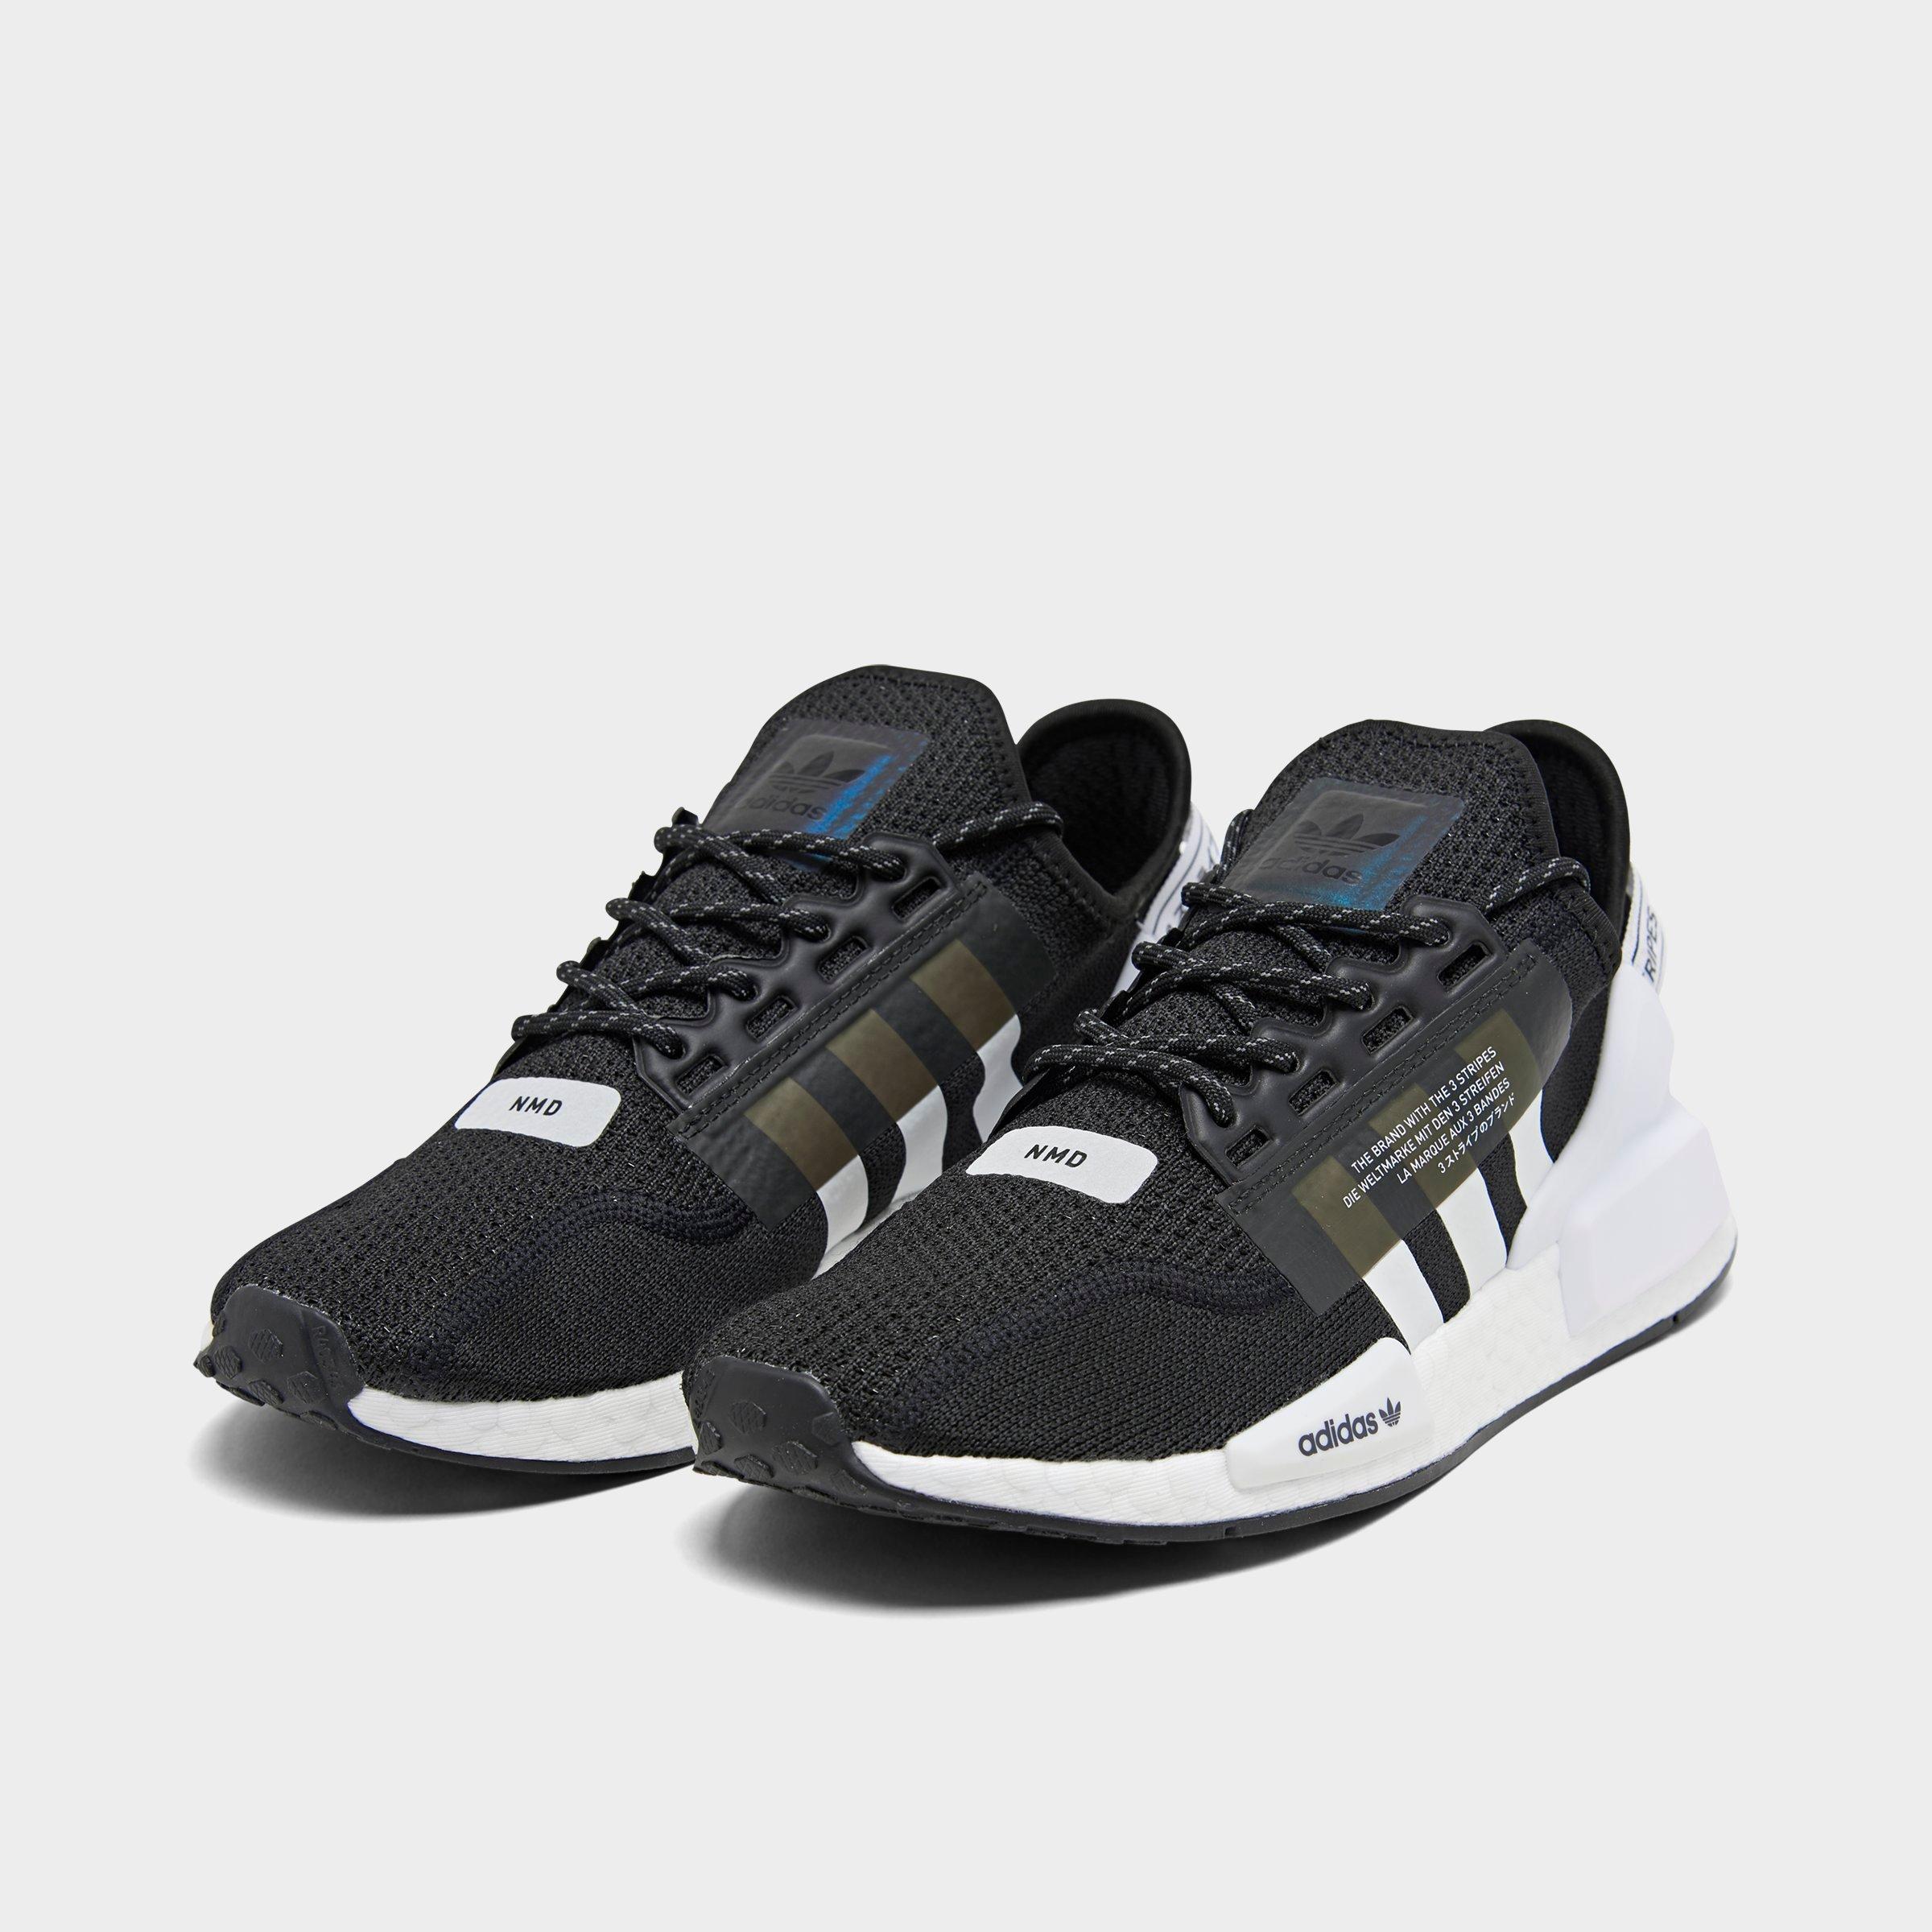 adidas NMD R1 Primeknit Ash Gray EE3650 Release Date SBD